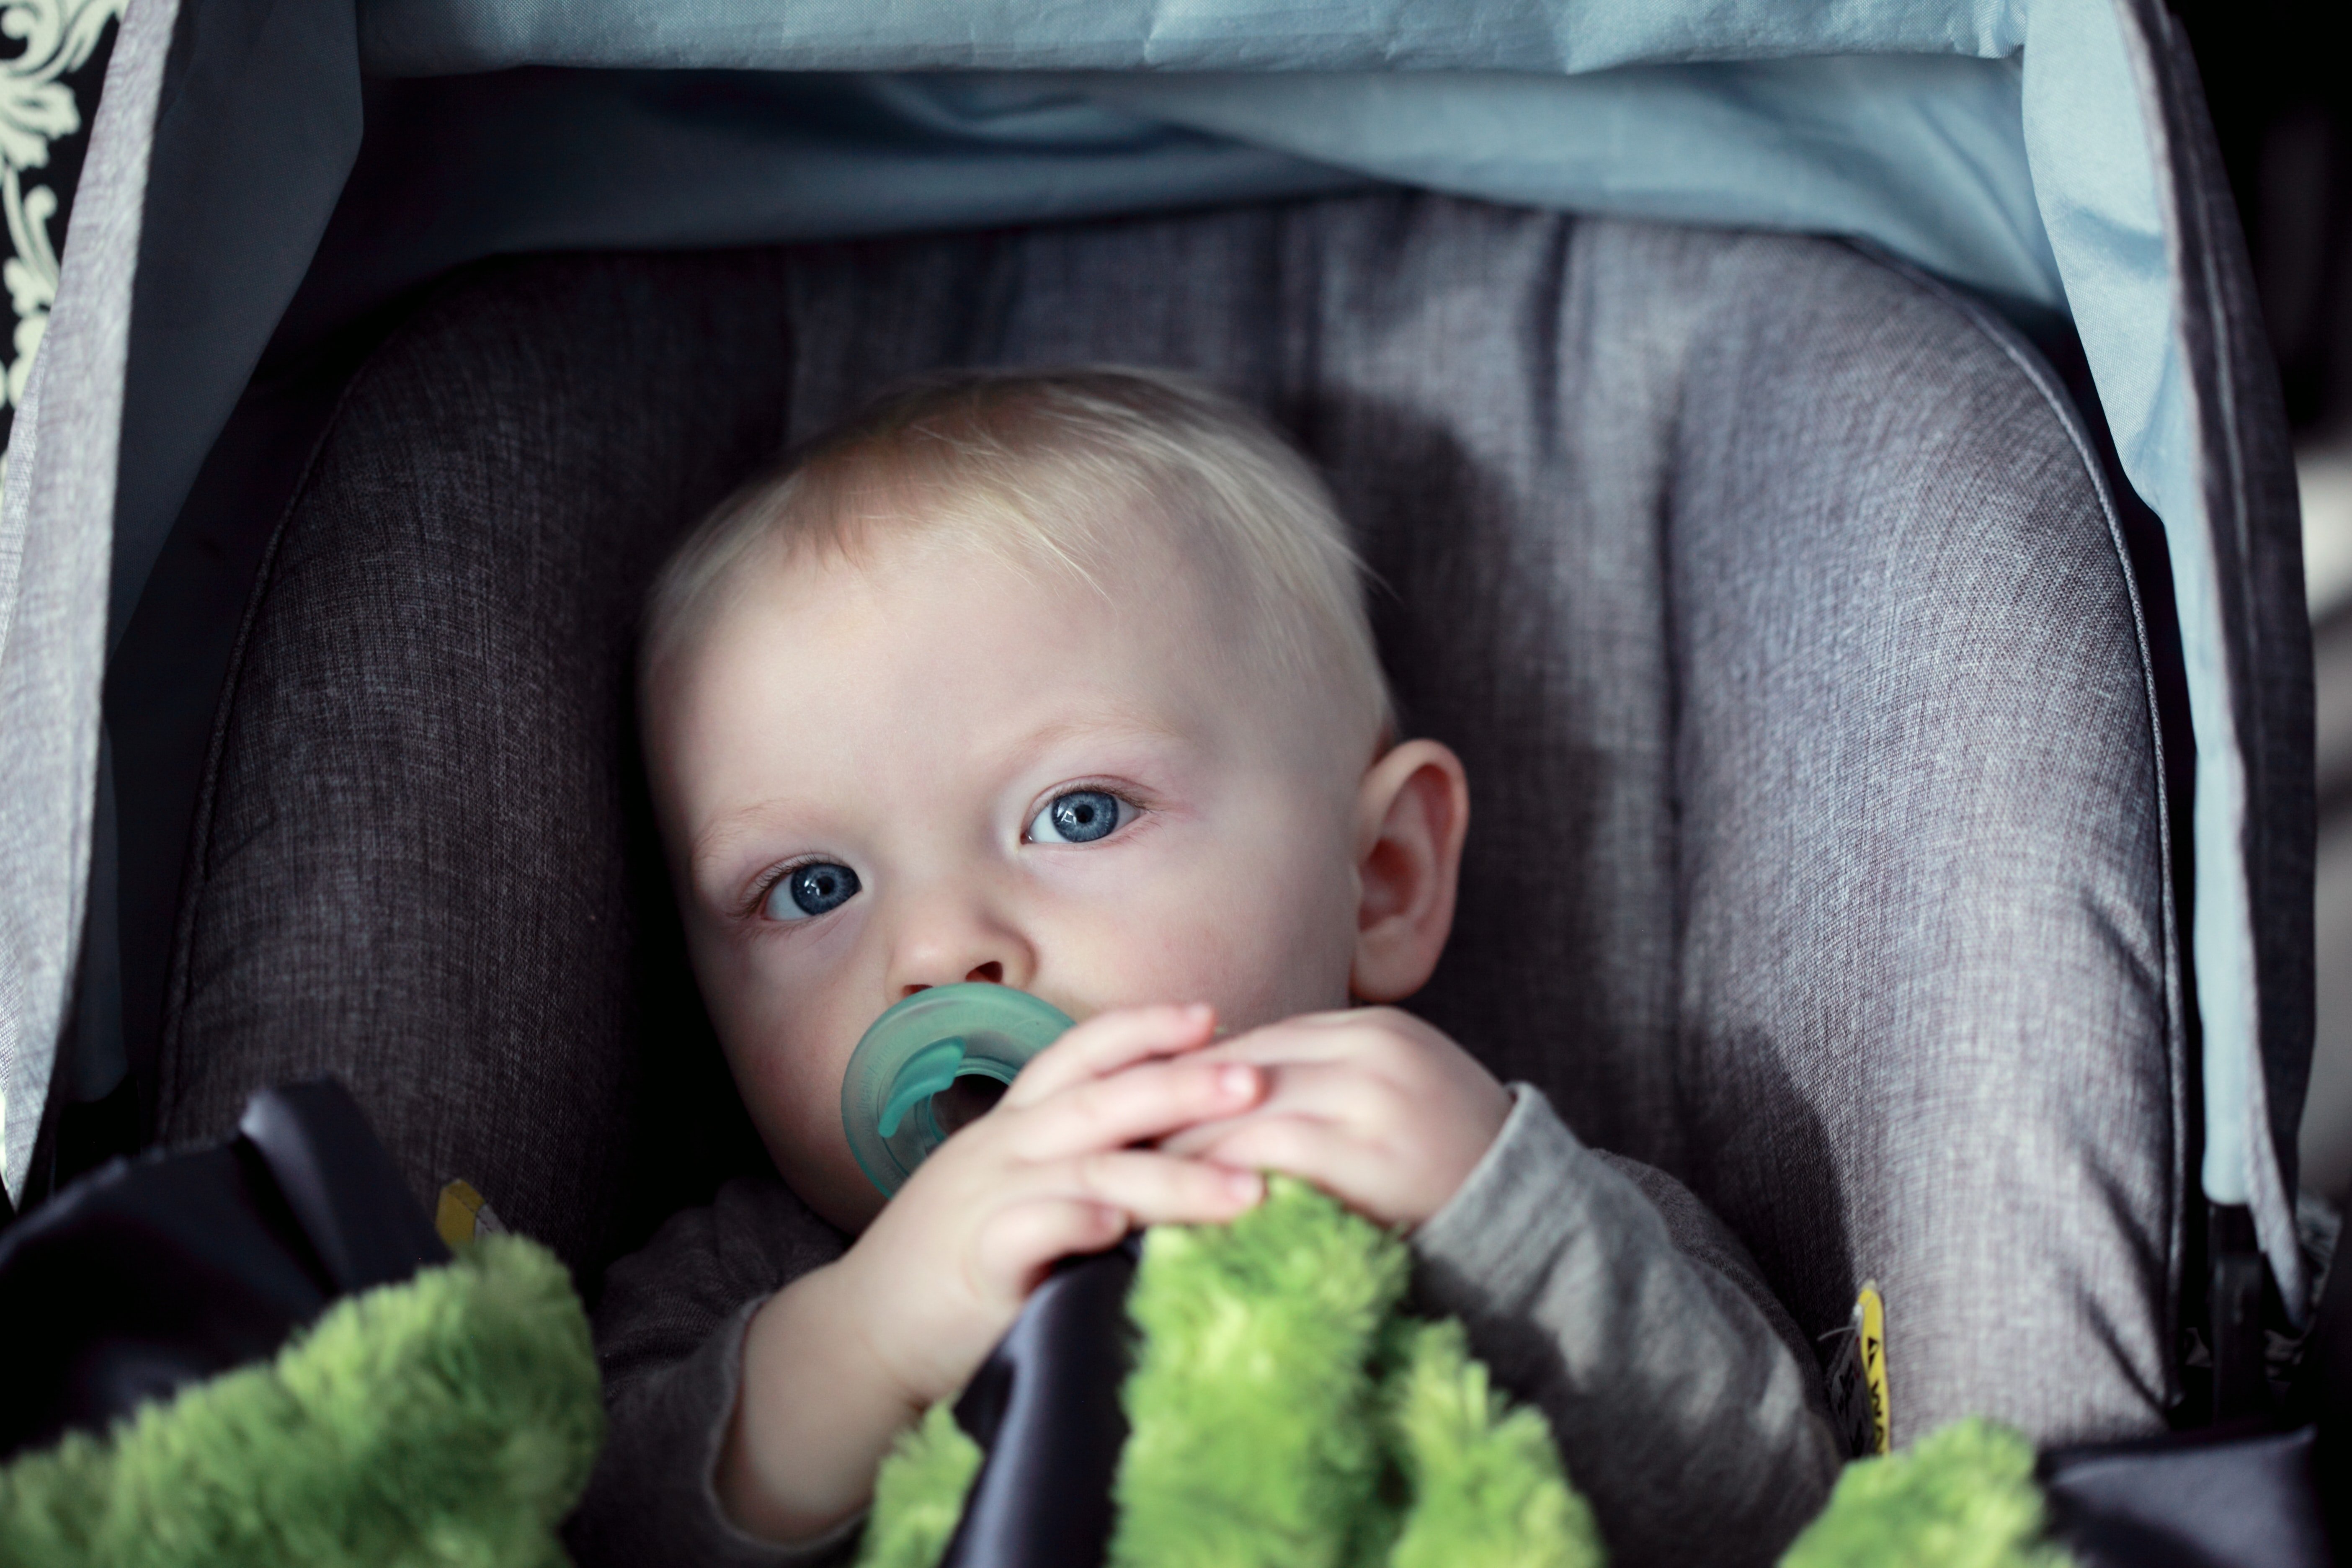 The nanny loosely installed the baby's car seat & claimed OP's mother told her it was fine. | Source: Unsplash   